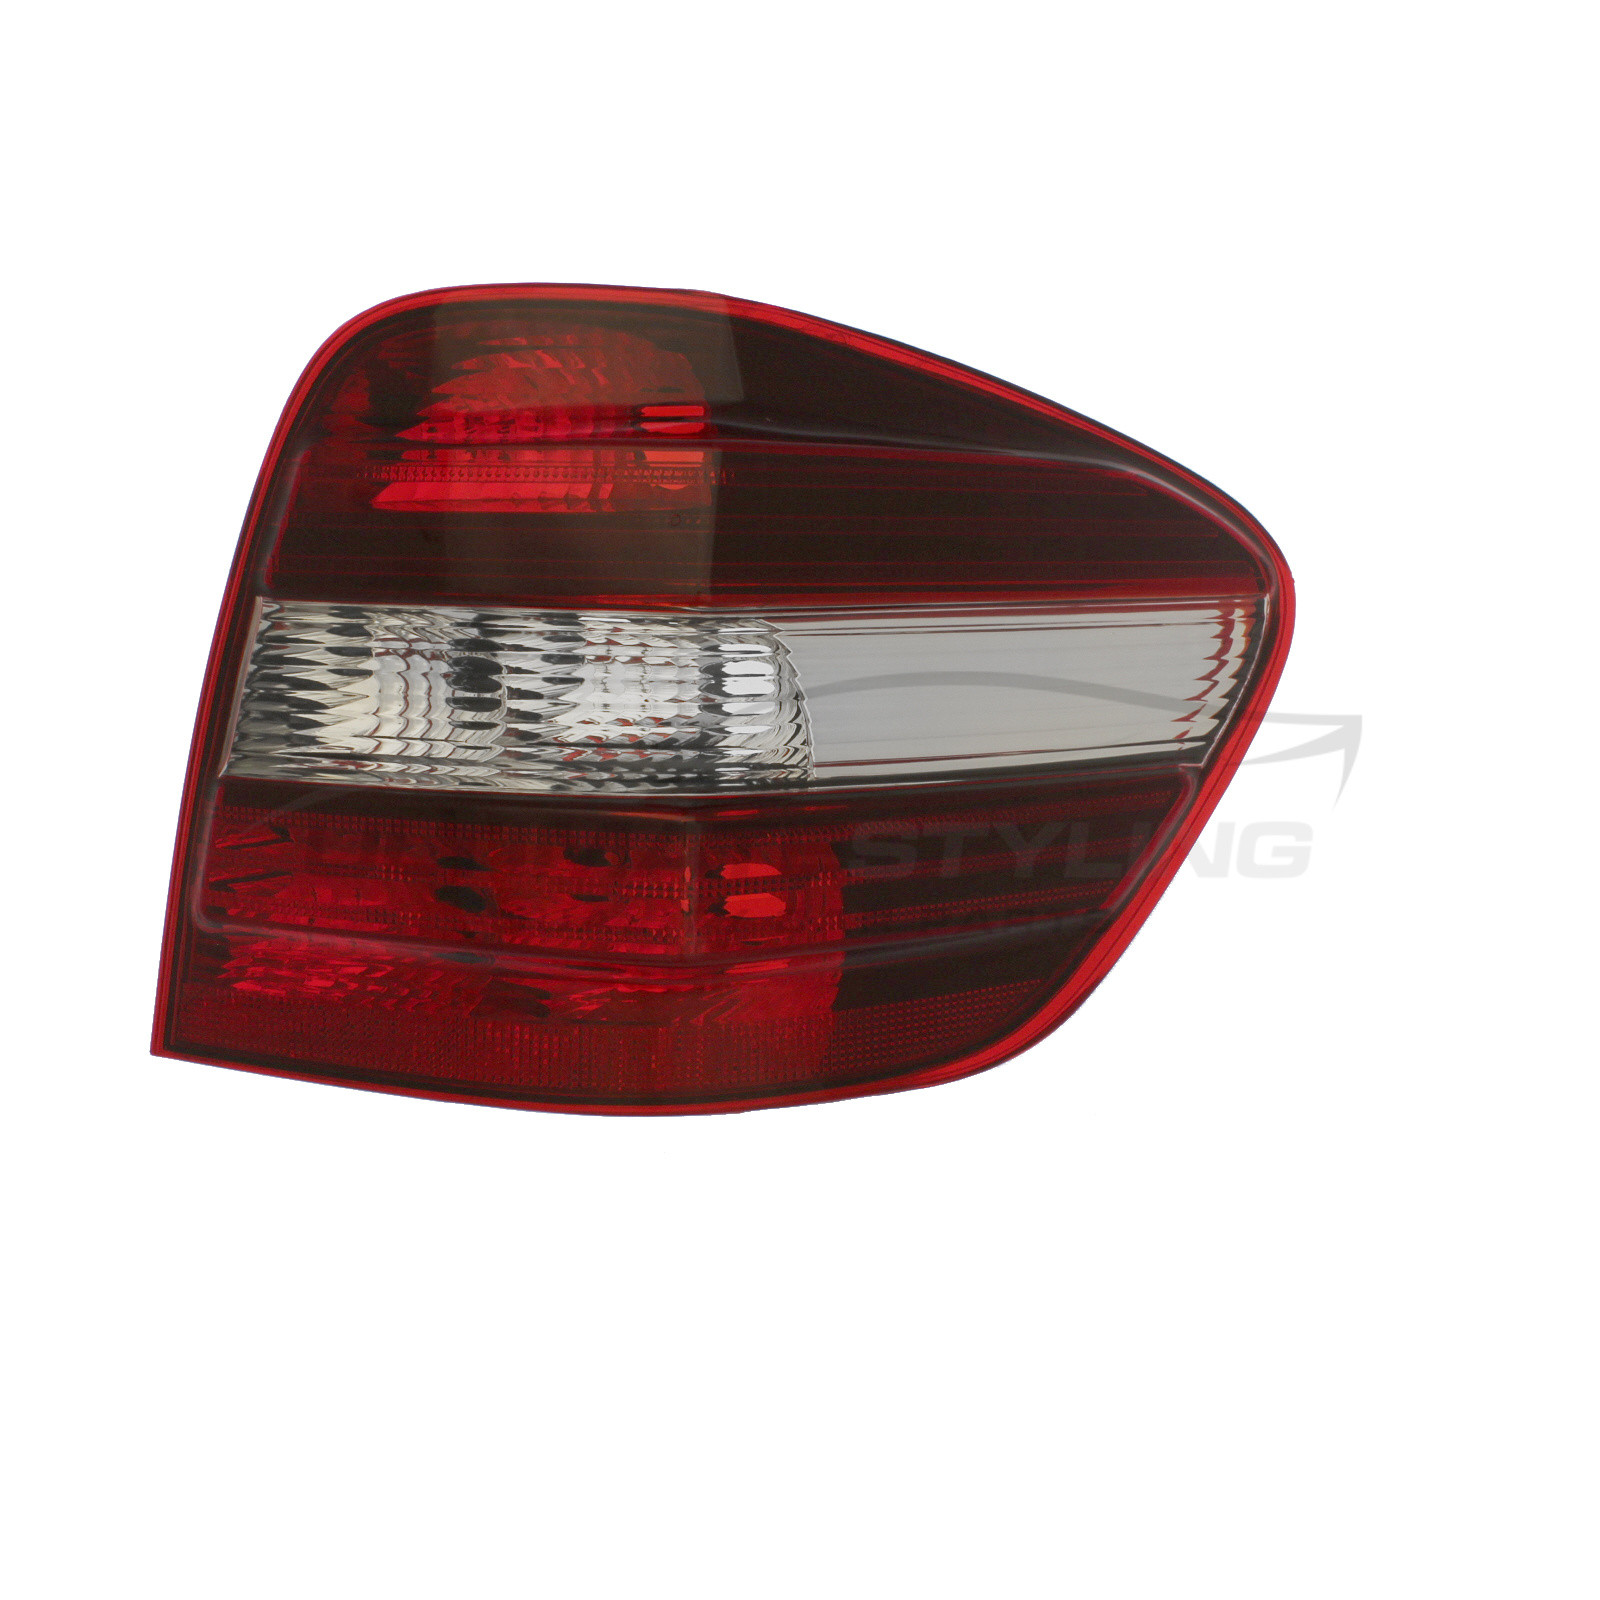 Mercedes Benz M Class 2008-2012 Non-LED Red Lens With Clear Indicator Rear Light / Tail Light Excluding Bulb Holder Drivers Side (RH)